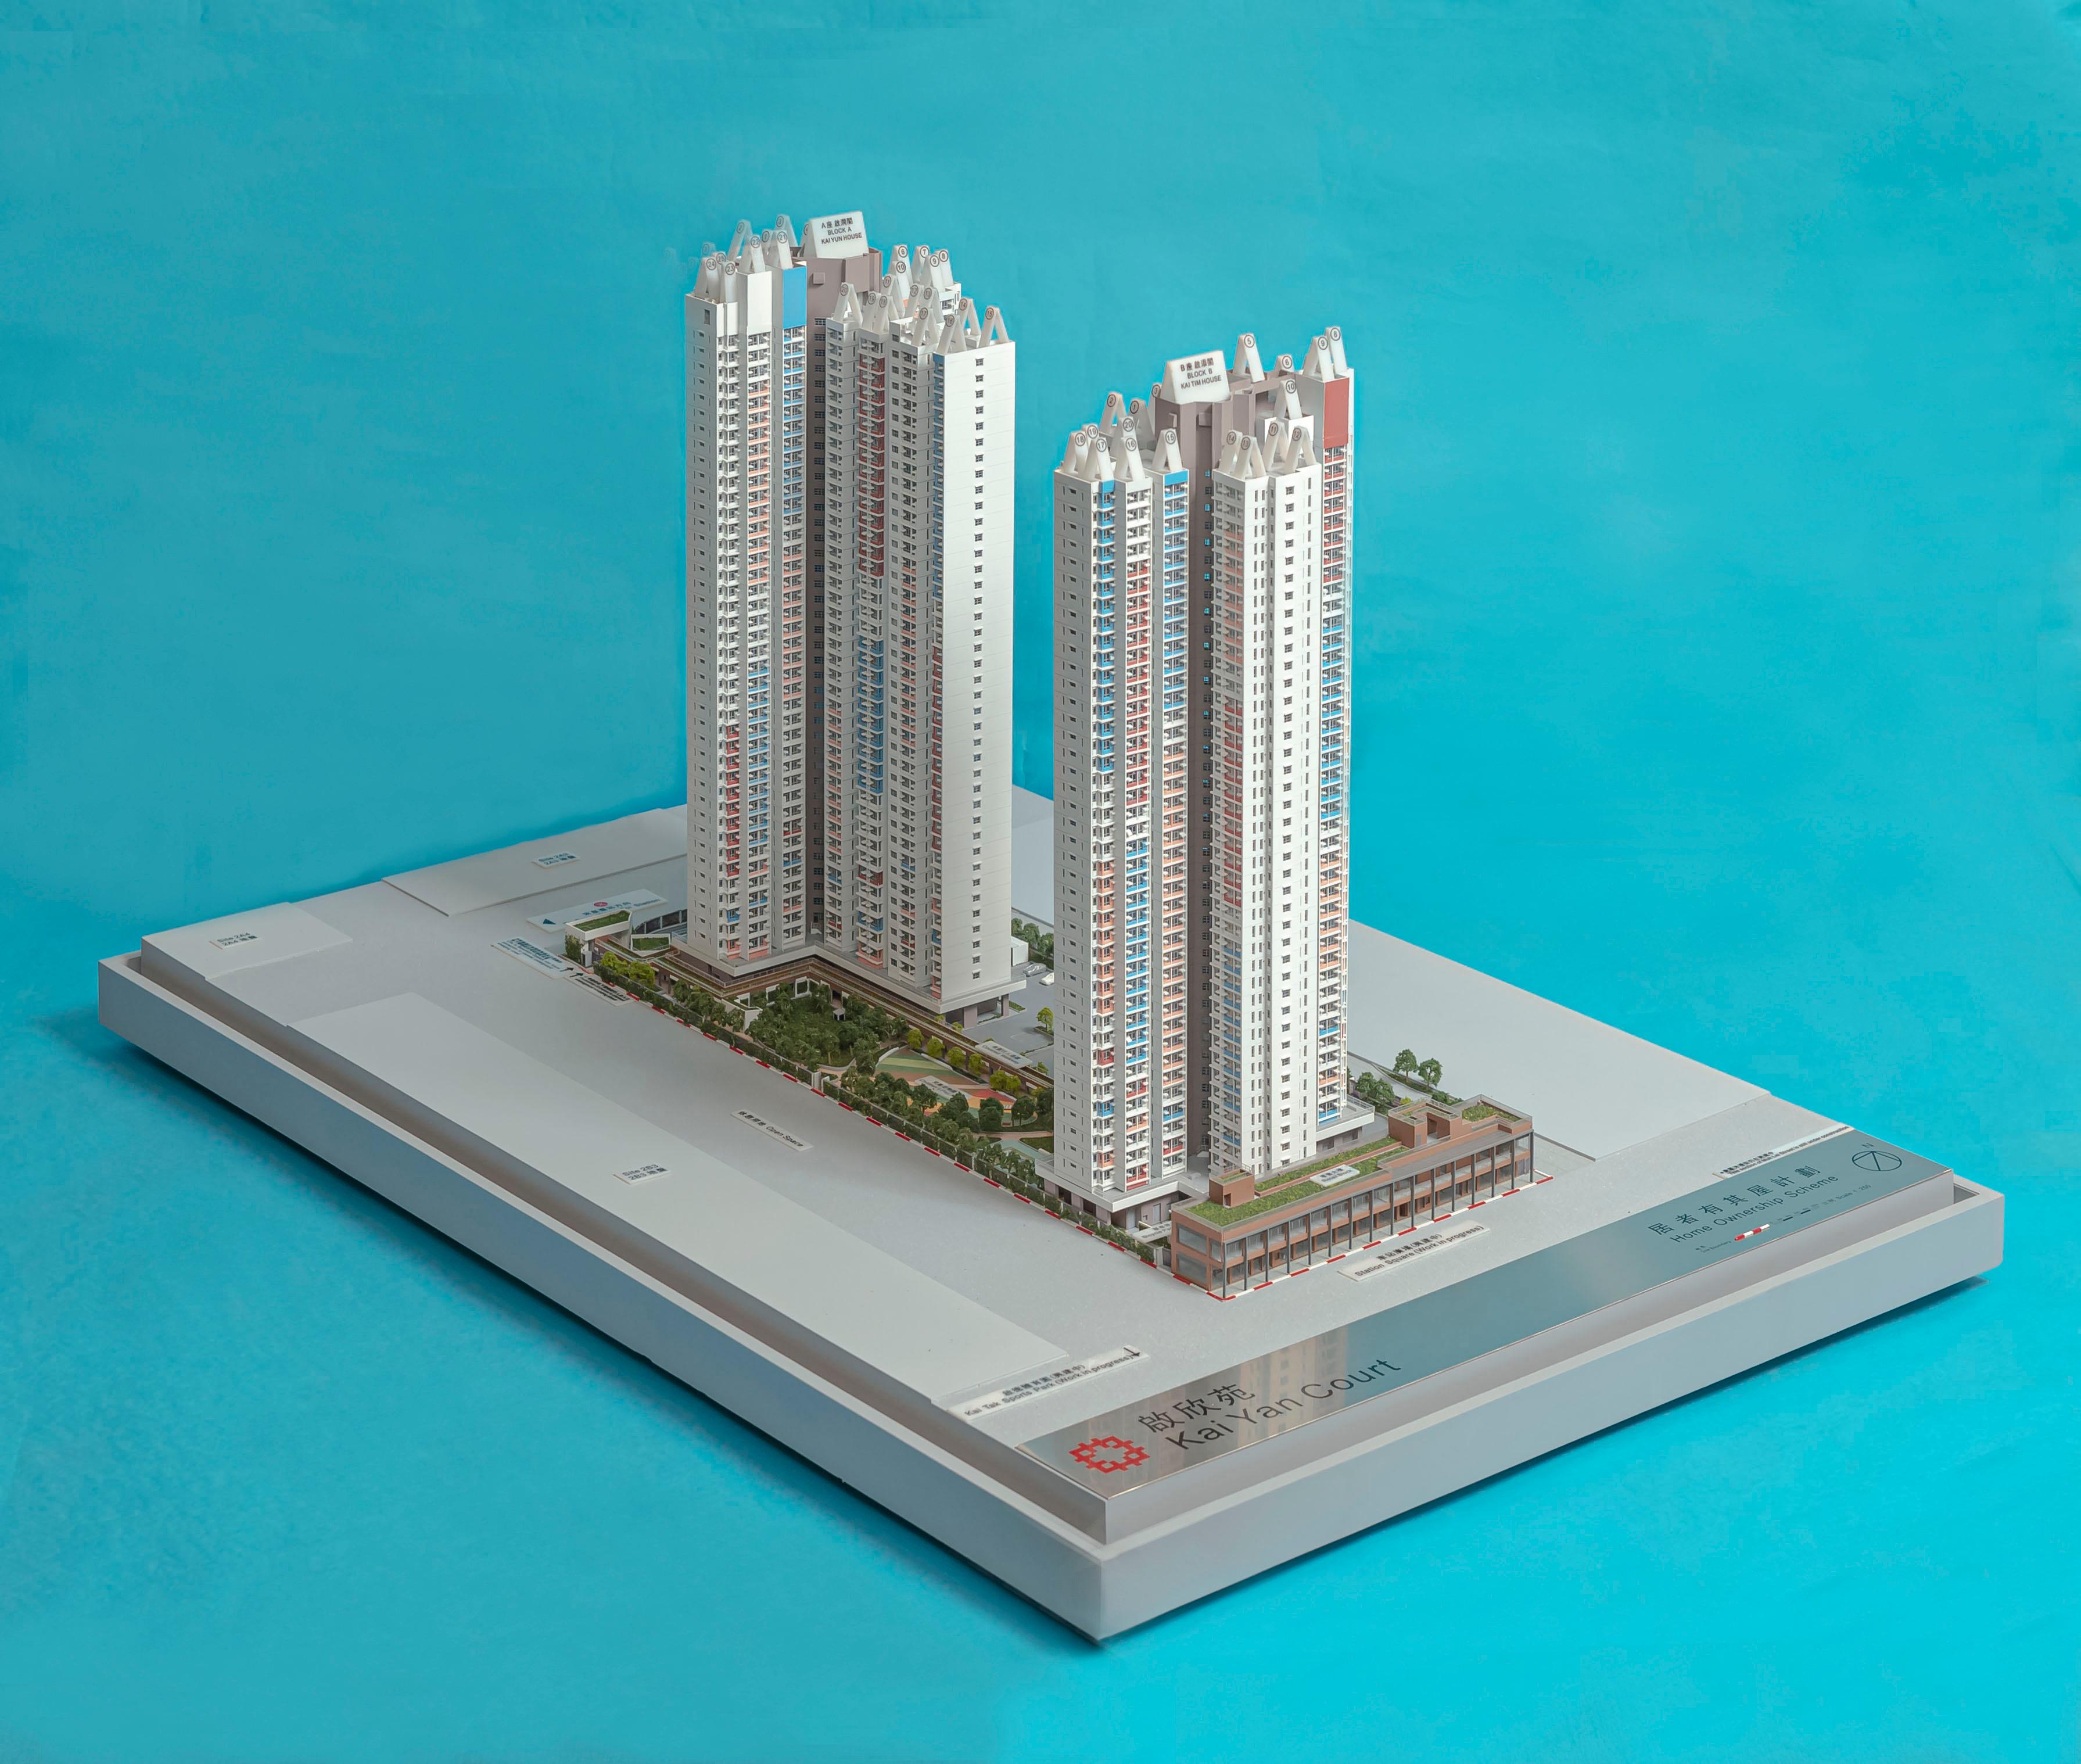 Applications for purchase under Sale of Home Ownership Scheme Flats 2022 will start on February 25. Photo shows a model of Kai Yan Court, which is a development project under the scheme.
